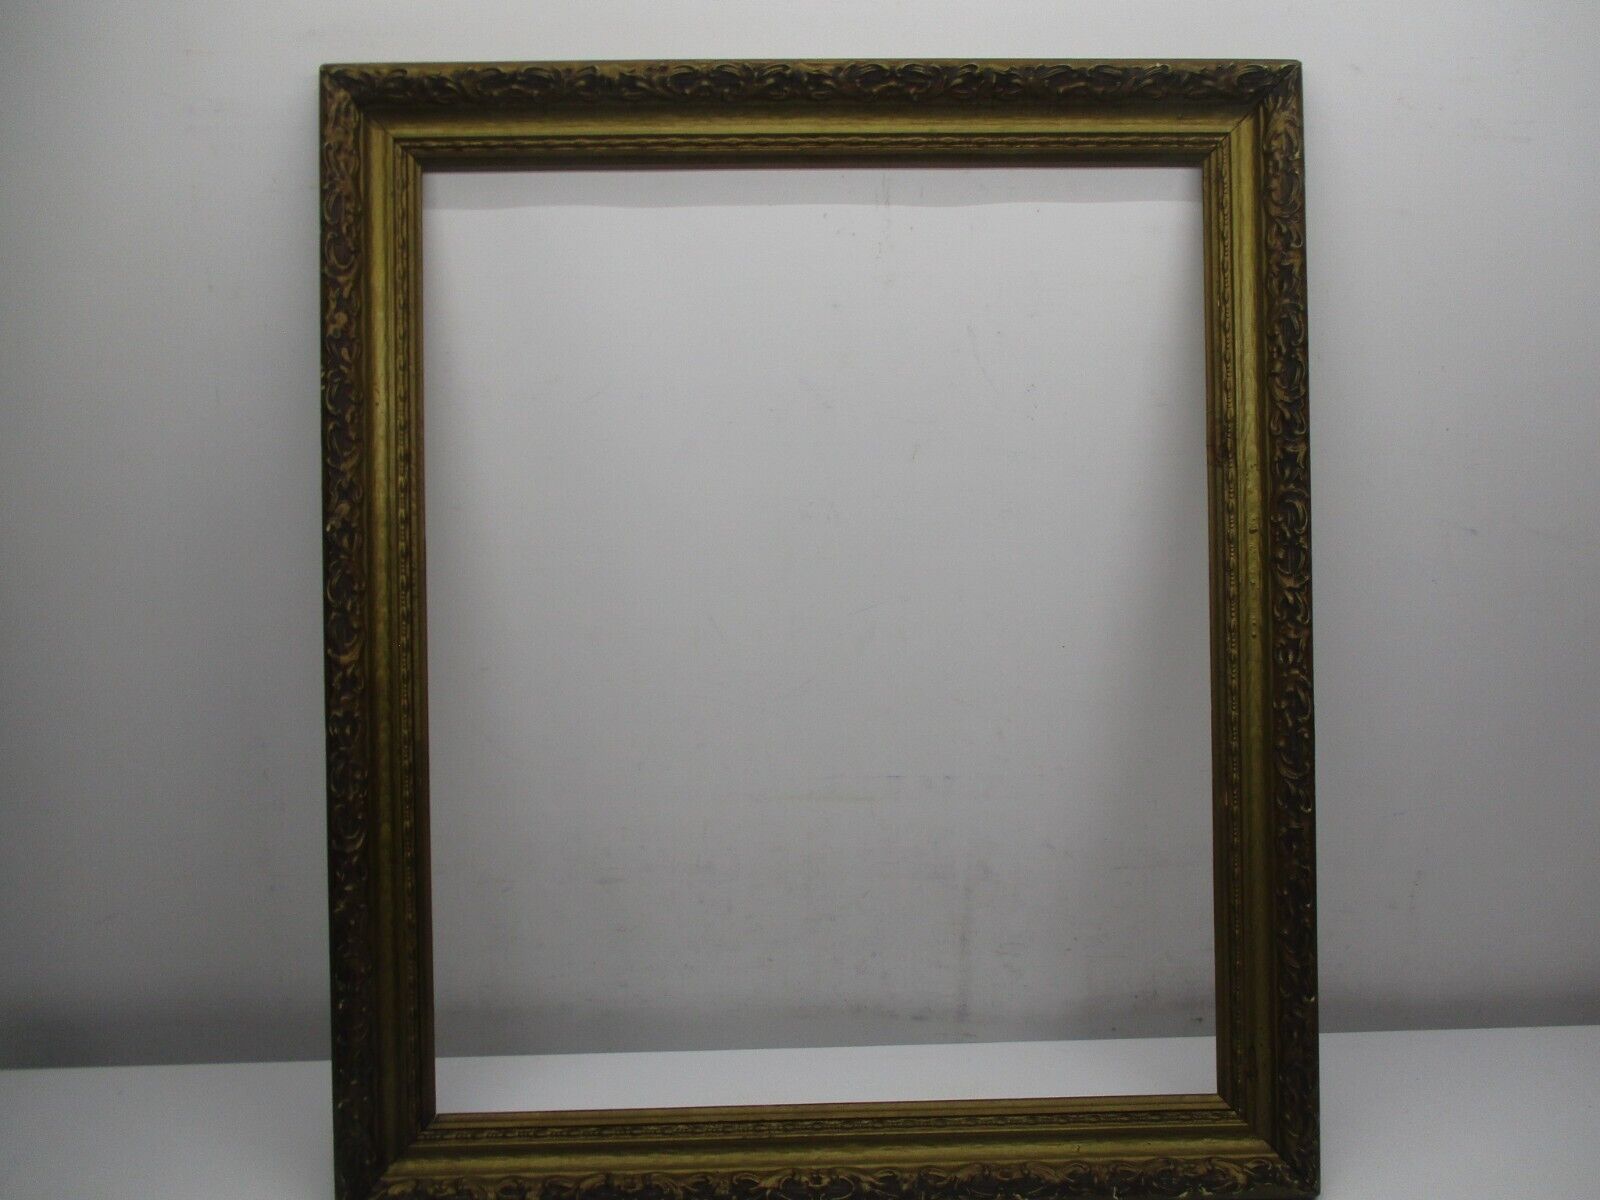 Large Old Ornate Solid Wood Gold & Brown Pic Frame Fits 20 X 24 Measures 24 X 28